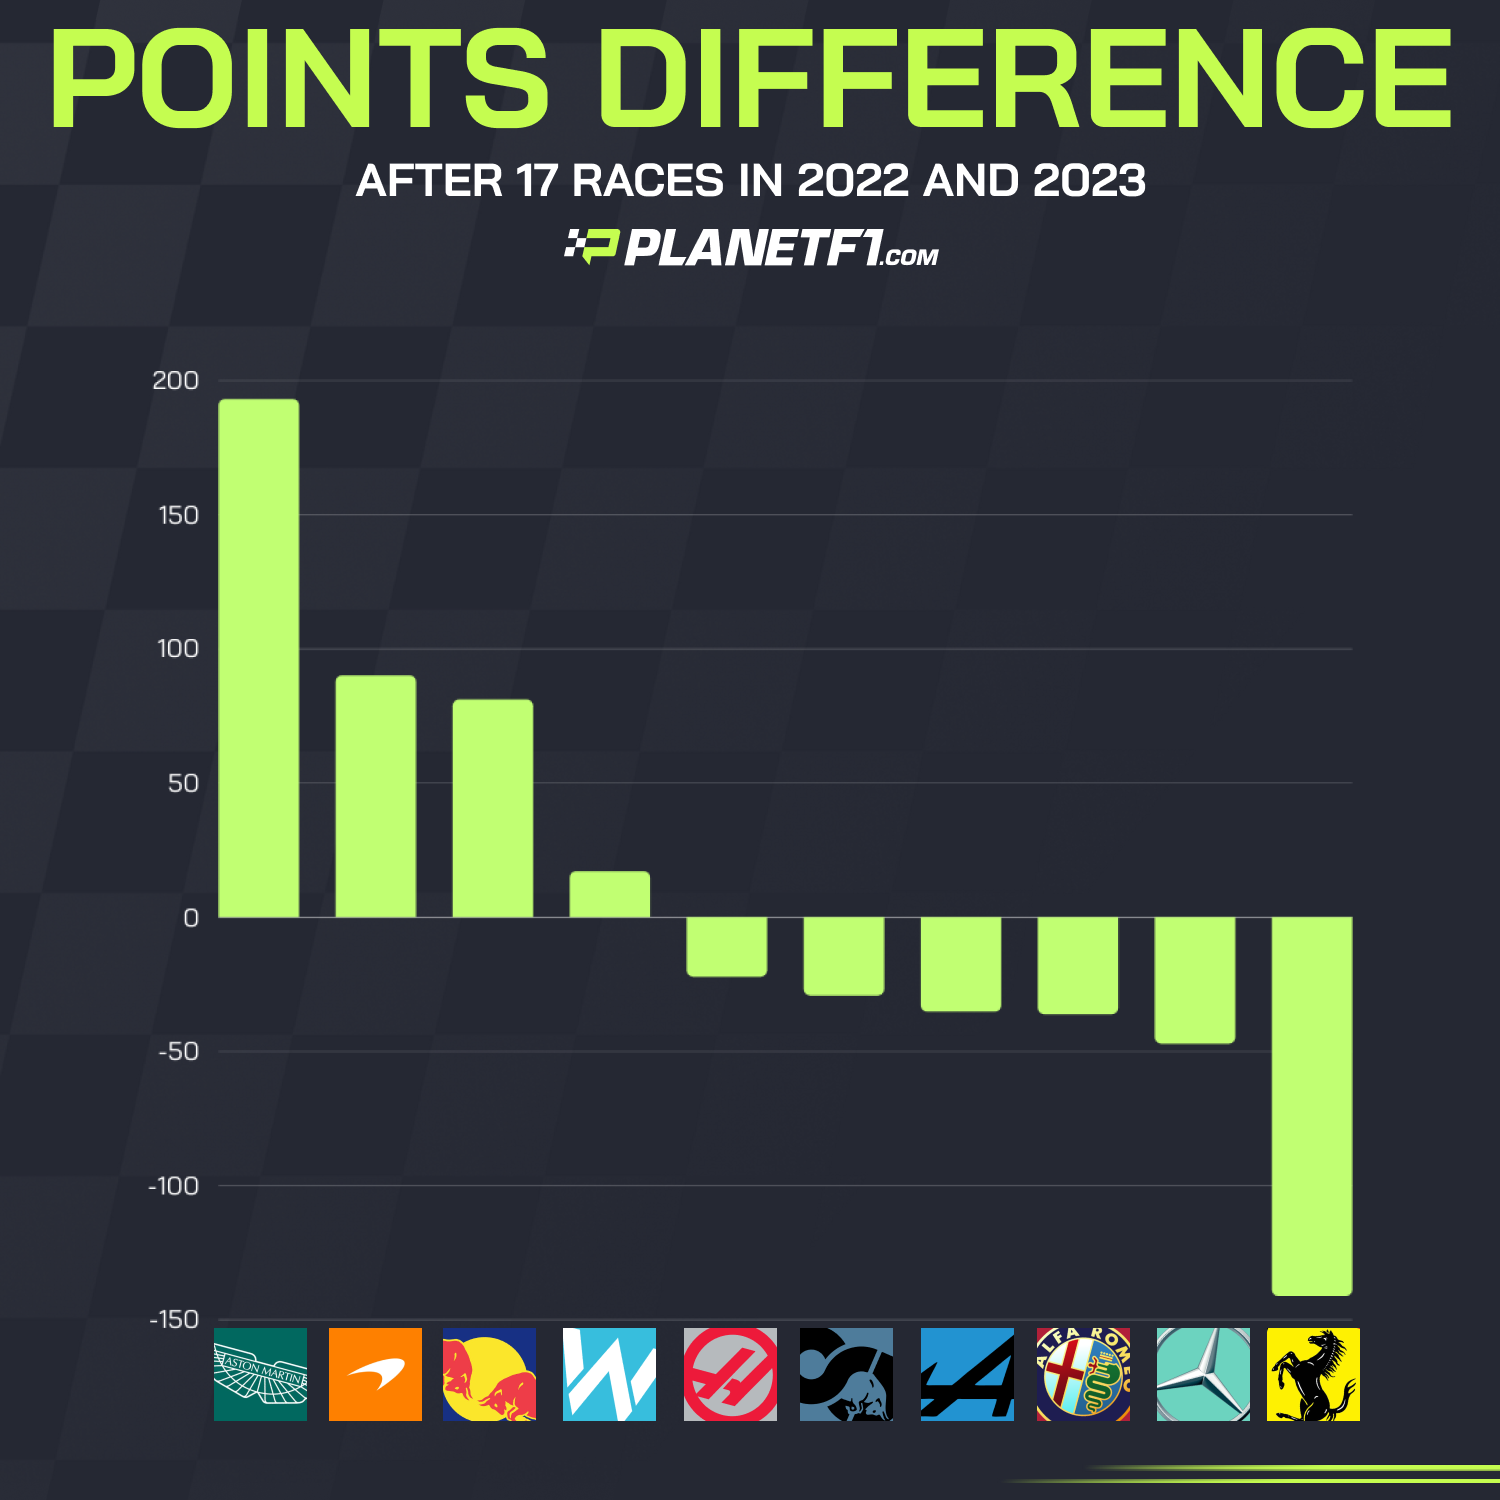 F1 teams' point differences